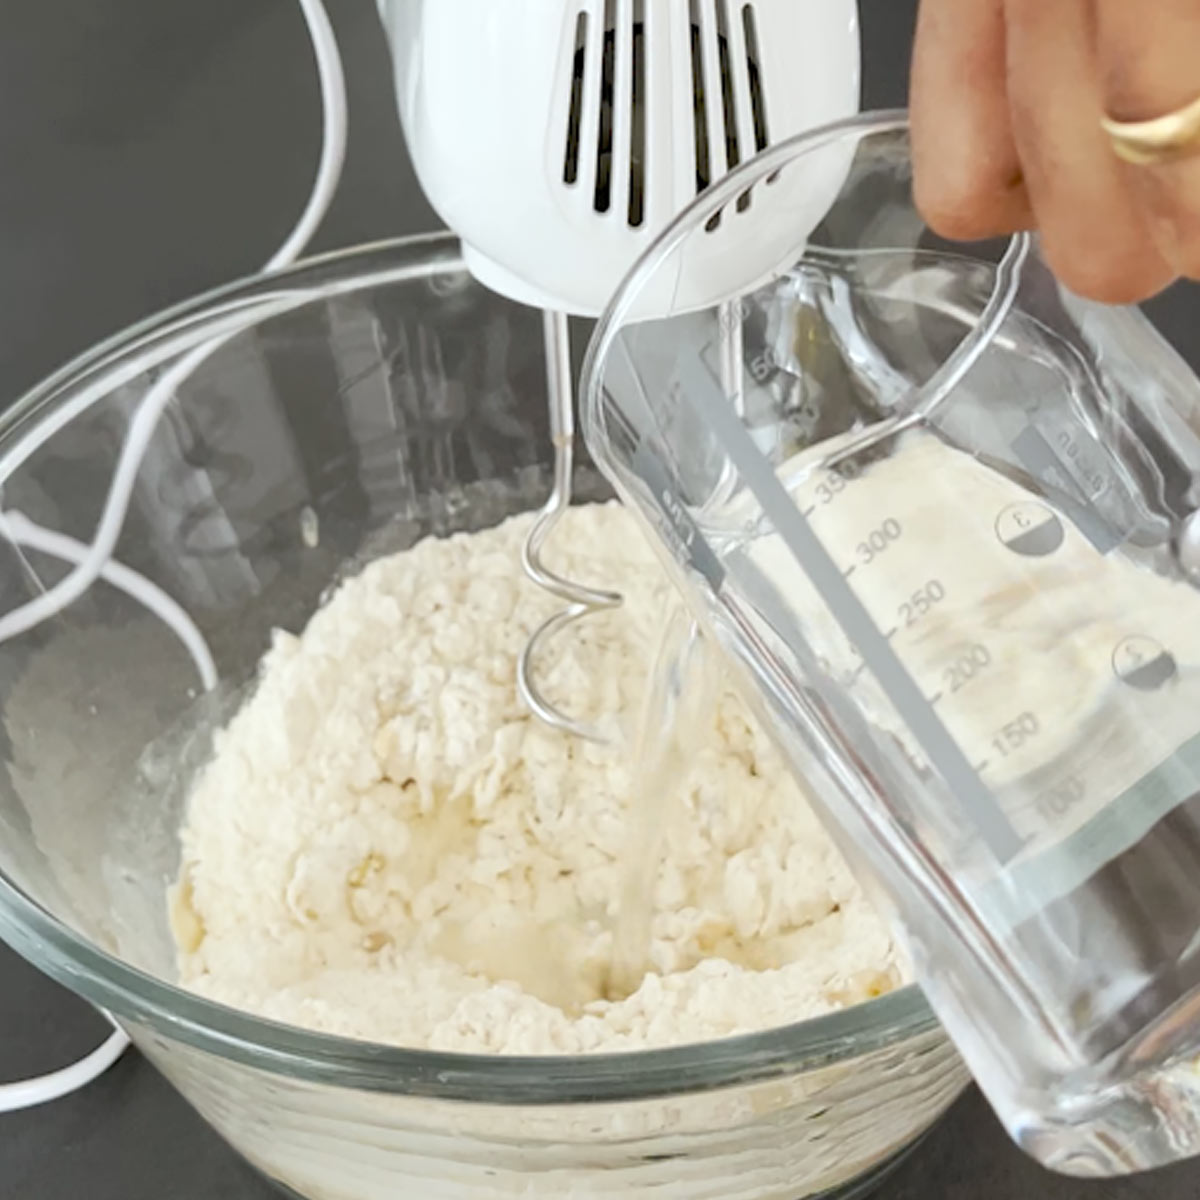 pour water to flour and other ingredients in the bowl